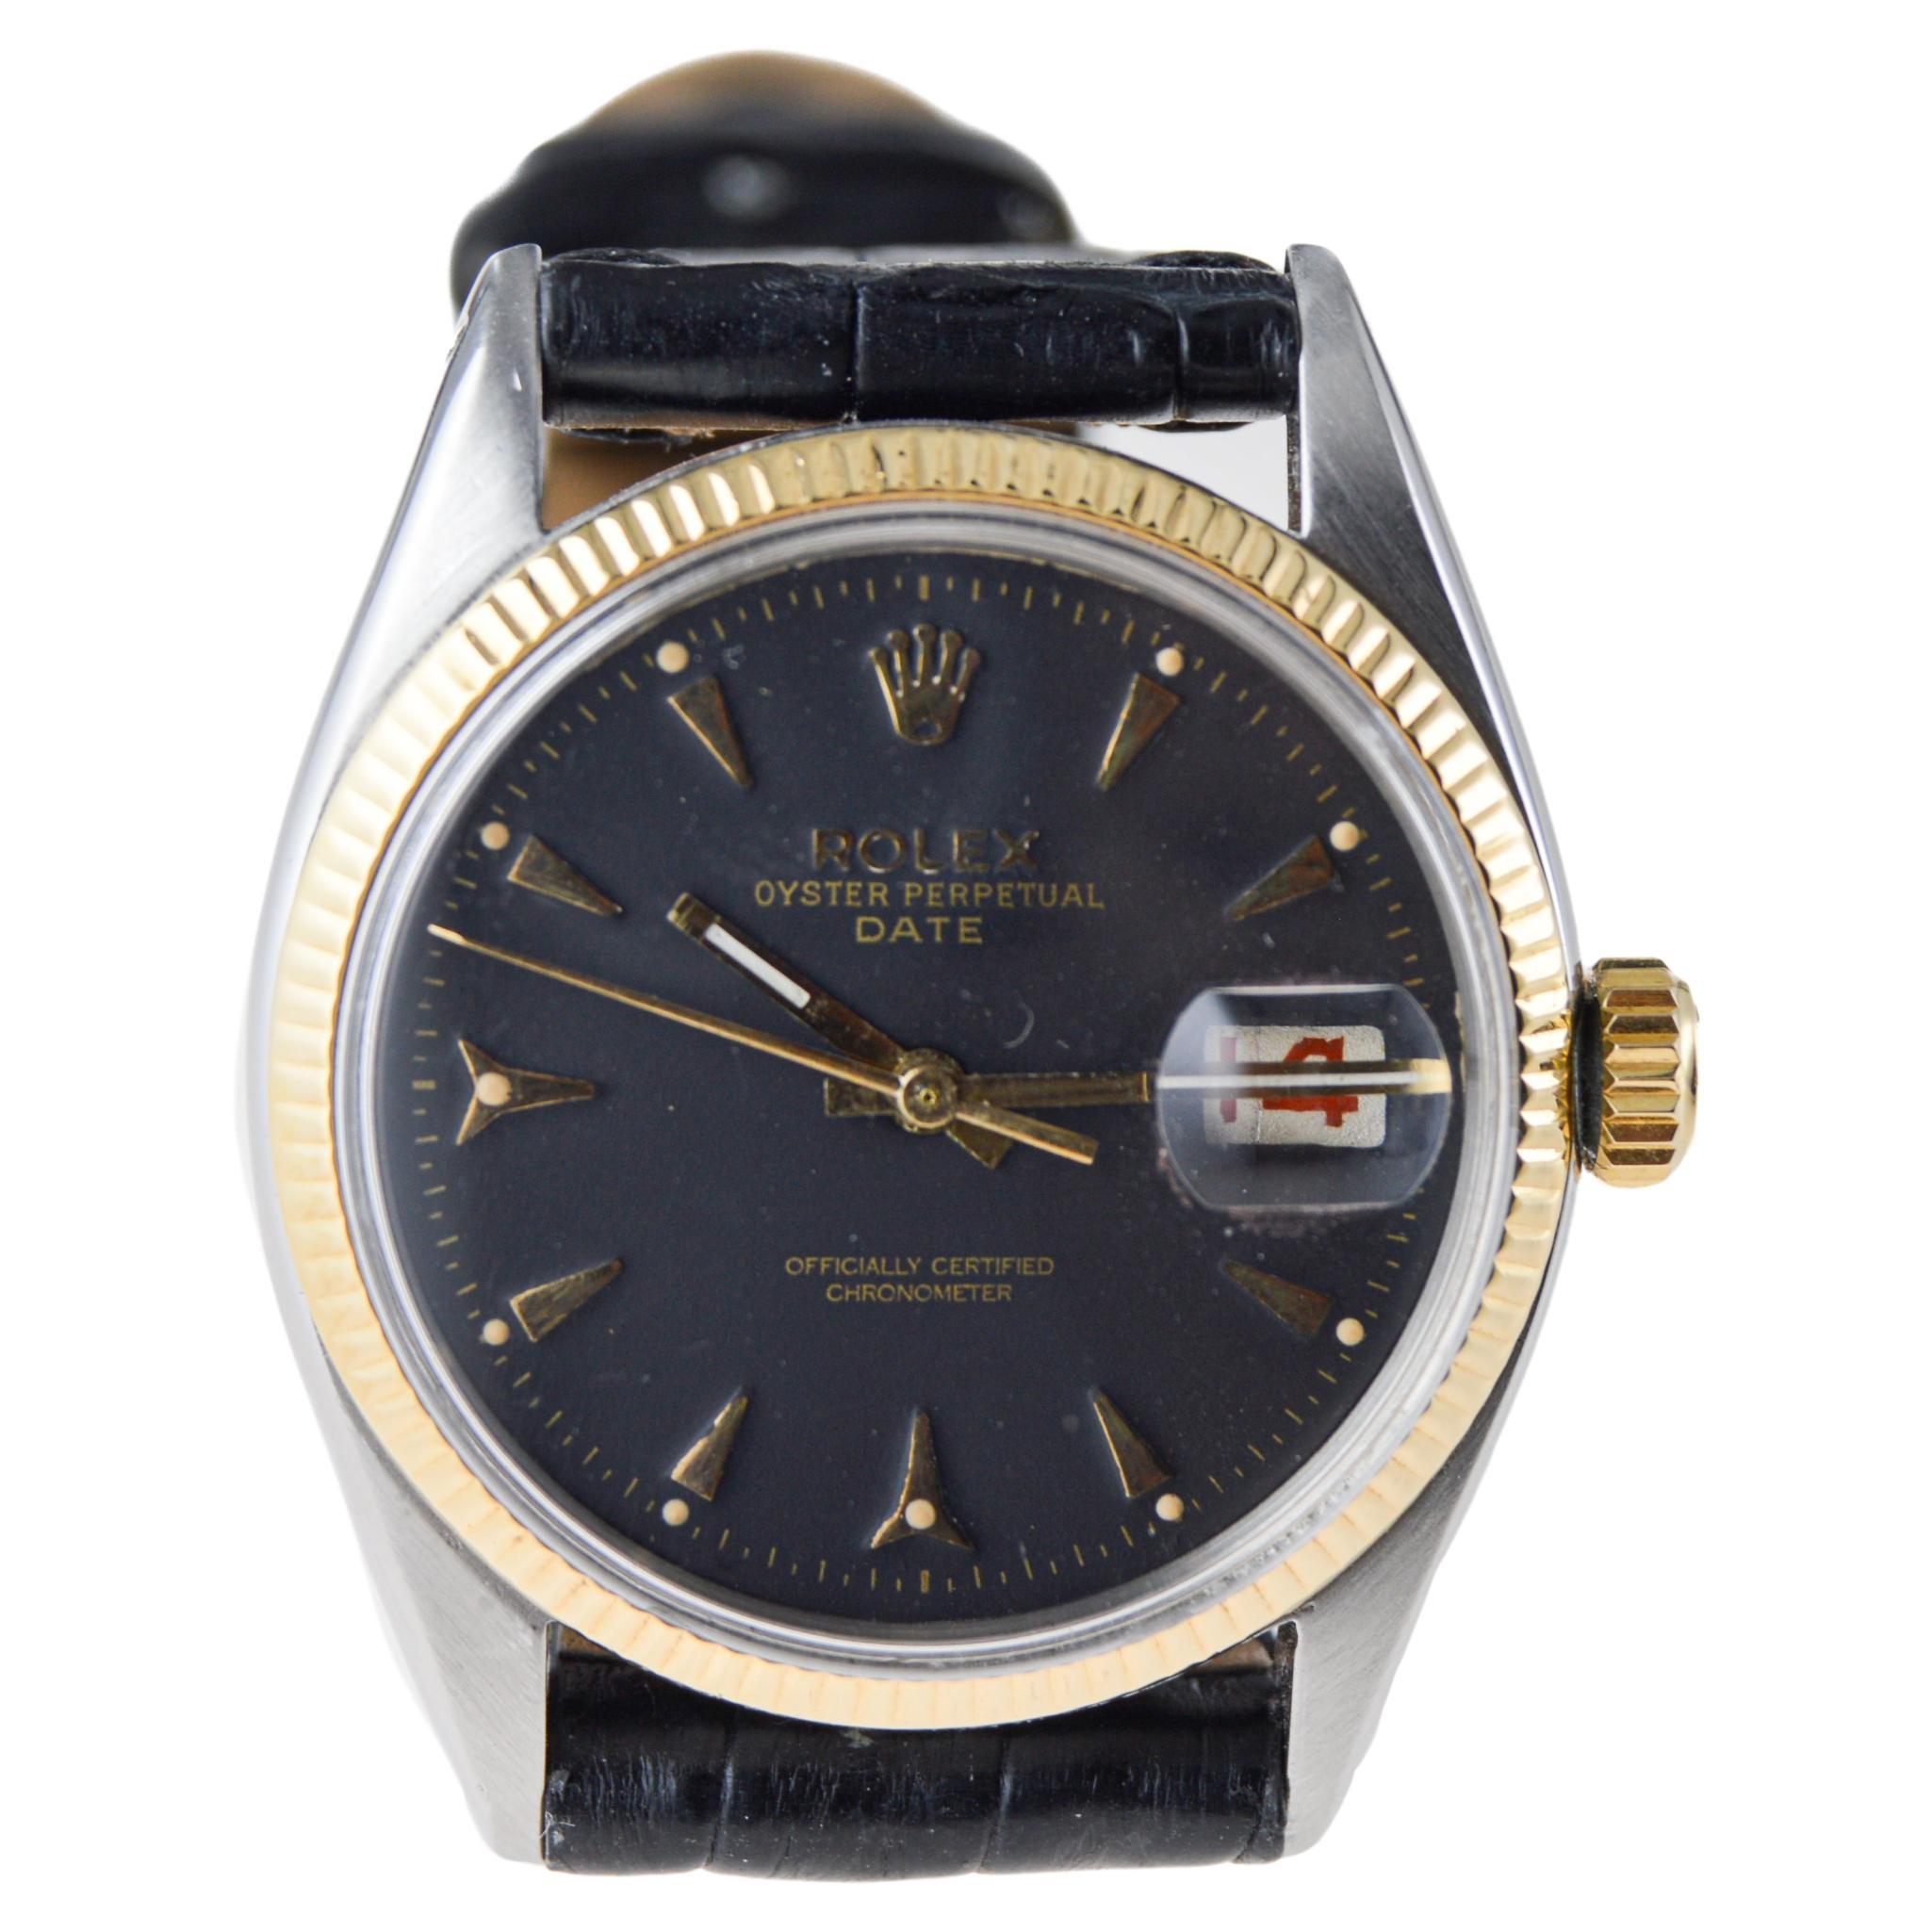 Rolex Steel and 14Kt. Oyster Perpetual Date from 1953 or 54 For Sale 1